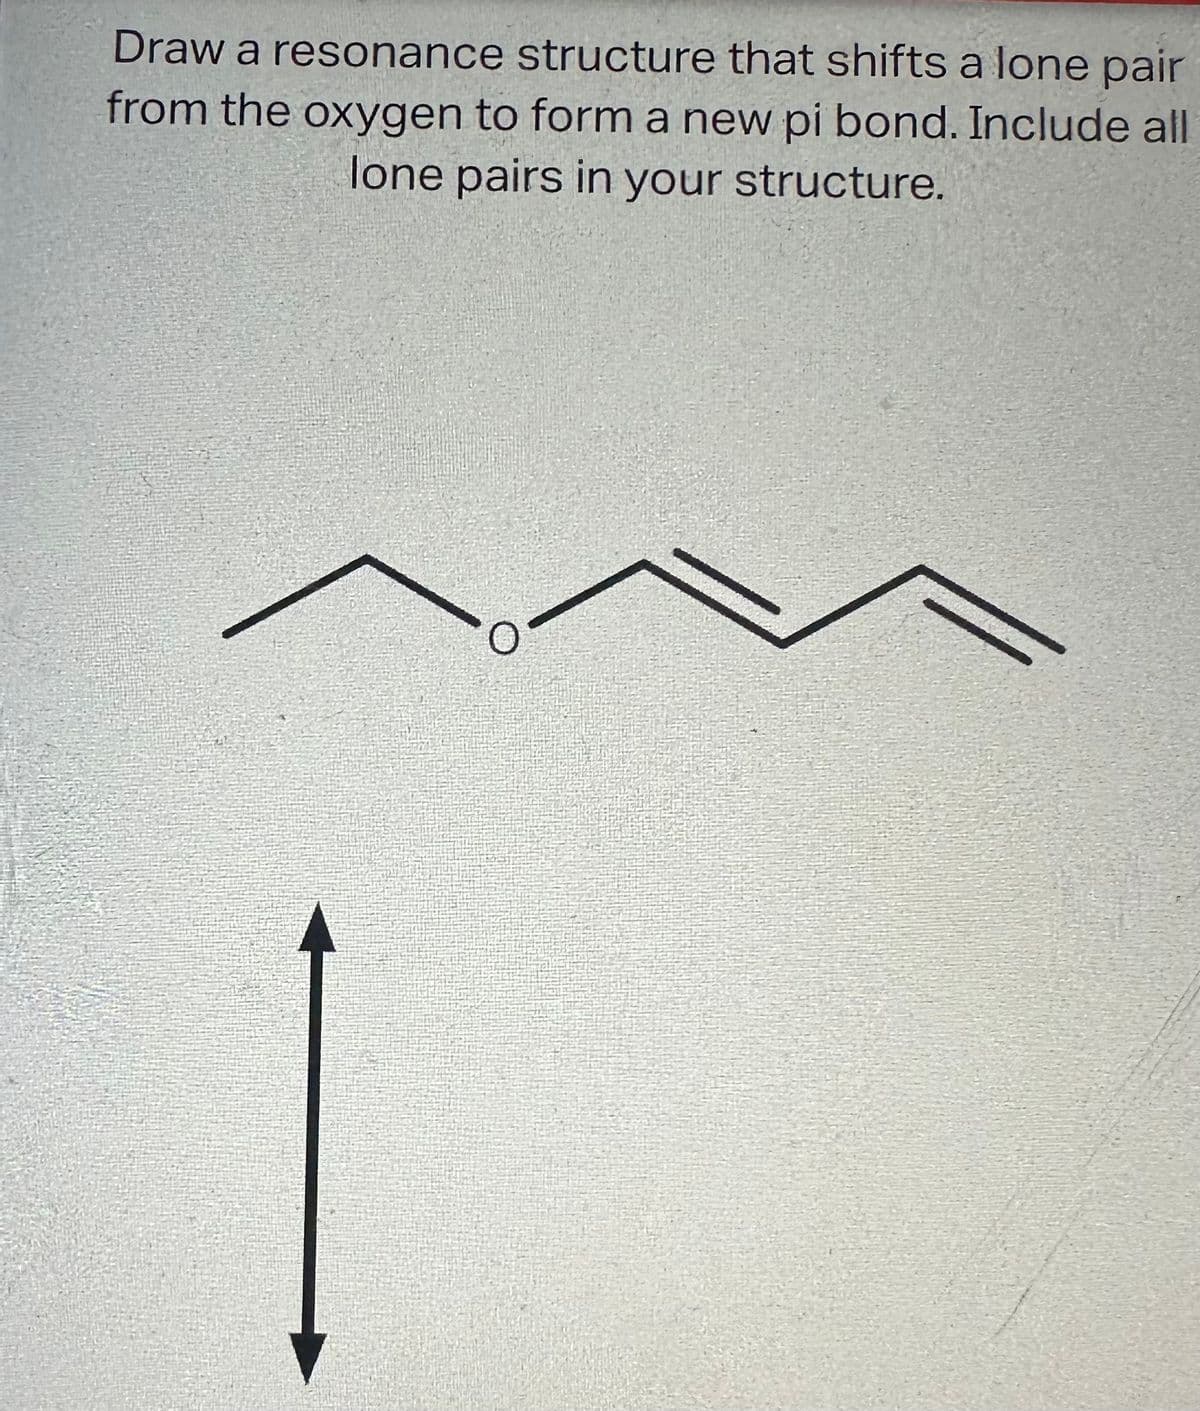 Draw a resonance structure that shifts a lone pair
from the oxygen to form a new pi bond. Include all
lone pairs in your structure.